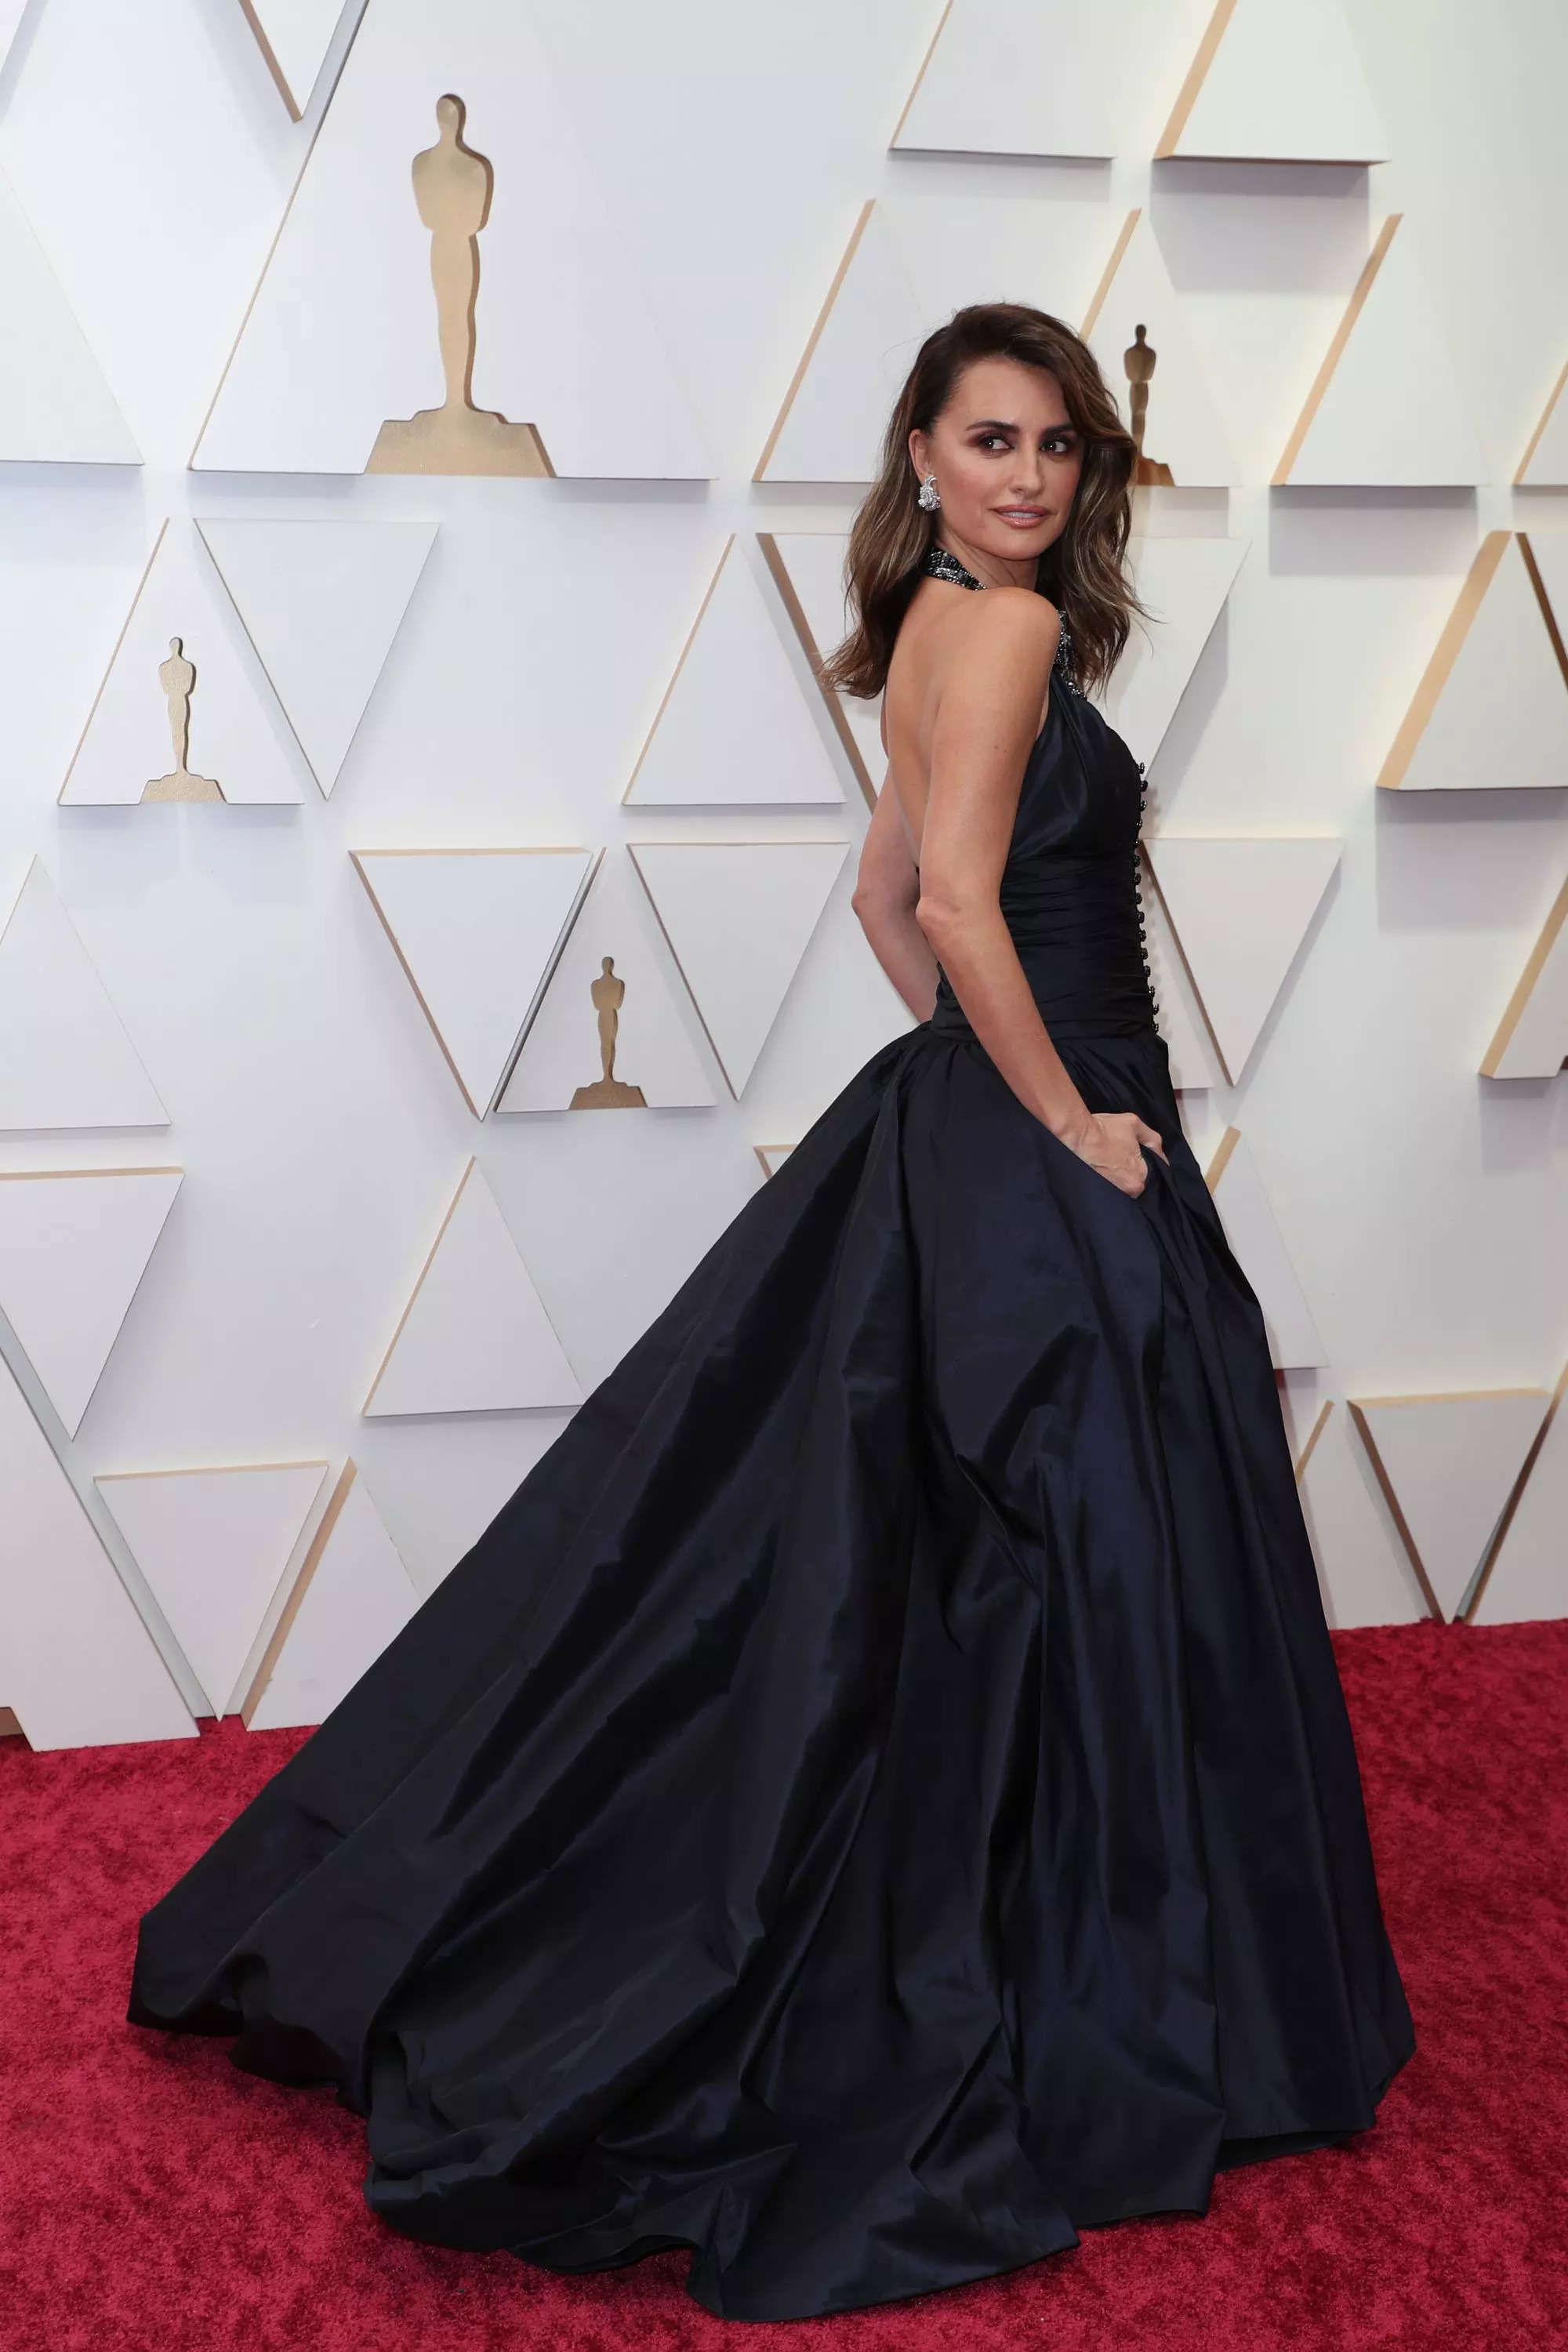 Penelope Cruz's Chanel gown for the Oscars took 680 hours to make and  featured 8,000 embroidered pieces